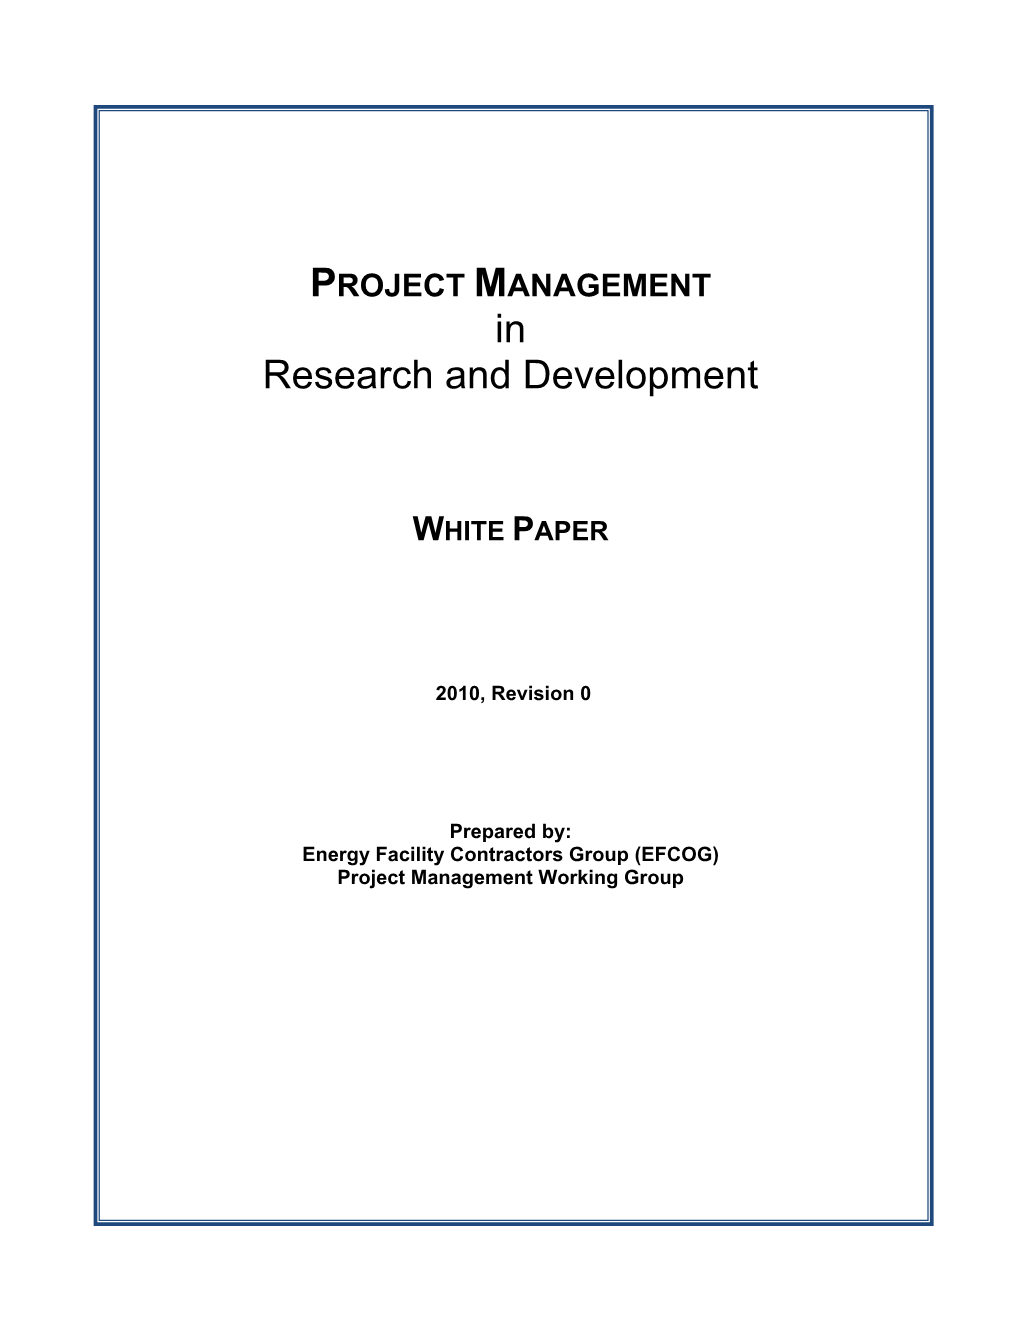 PROJECT MANAGEMENT in Research and Development